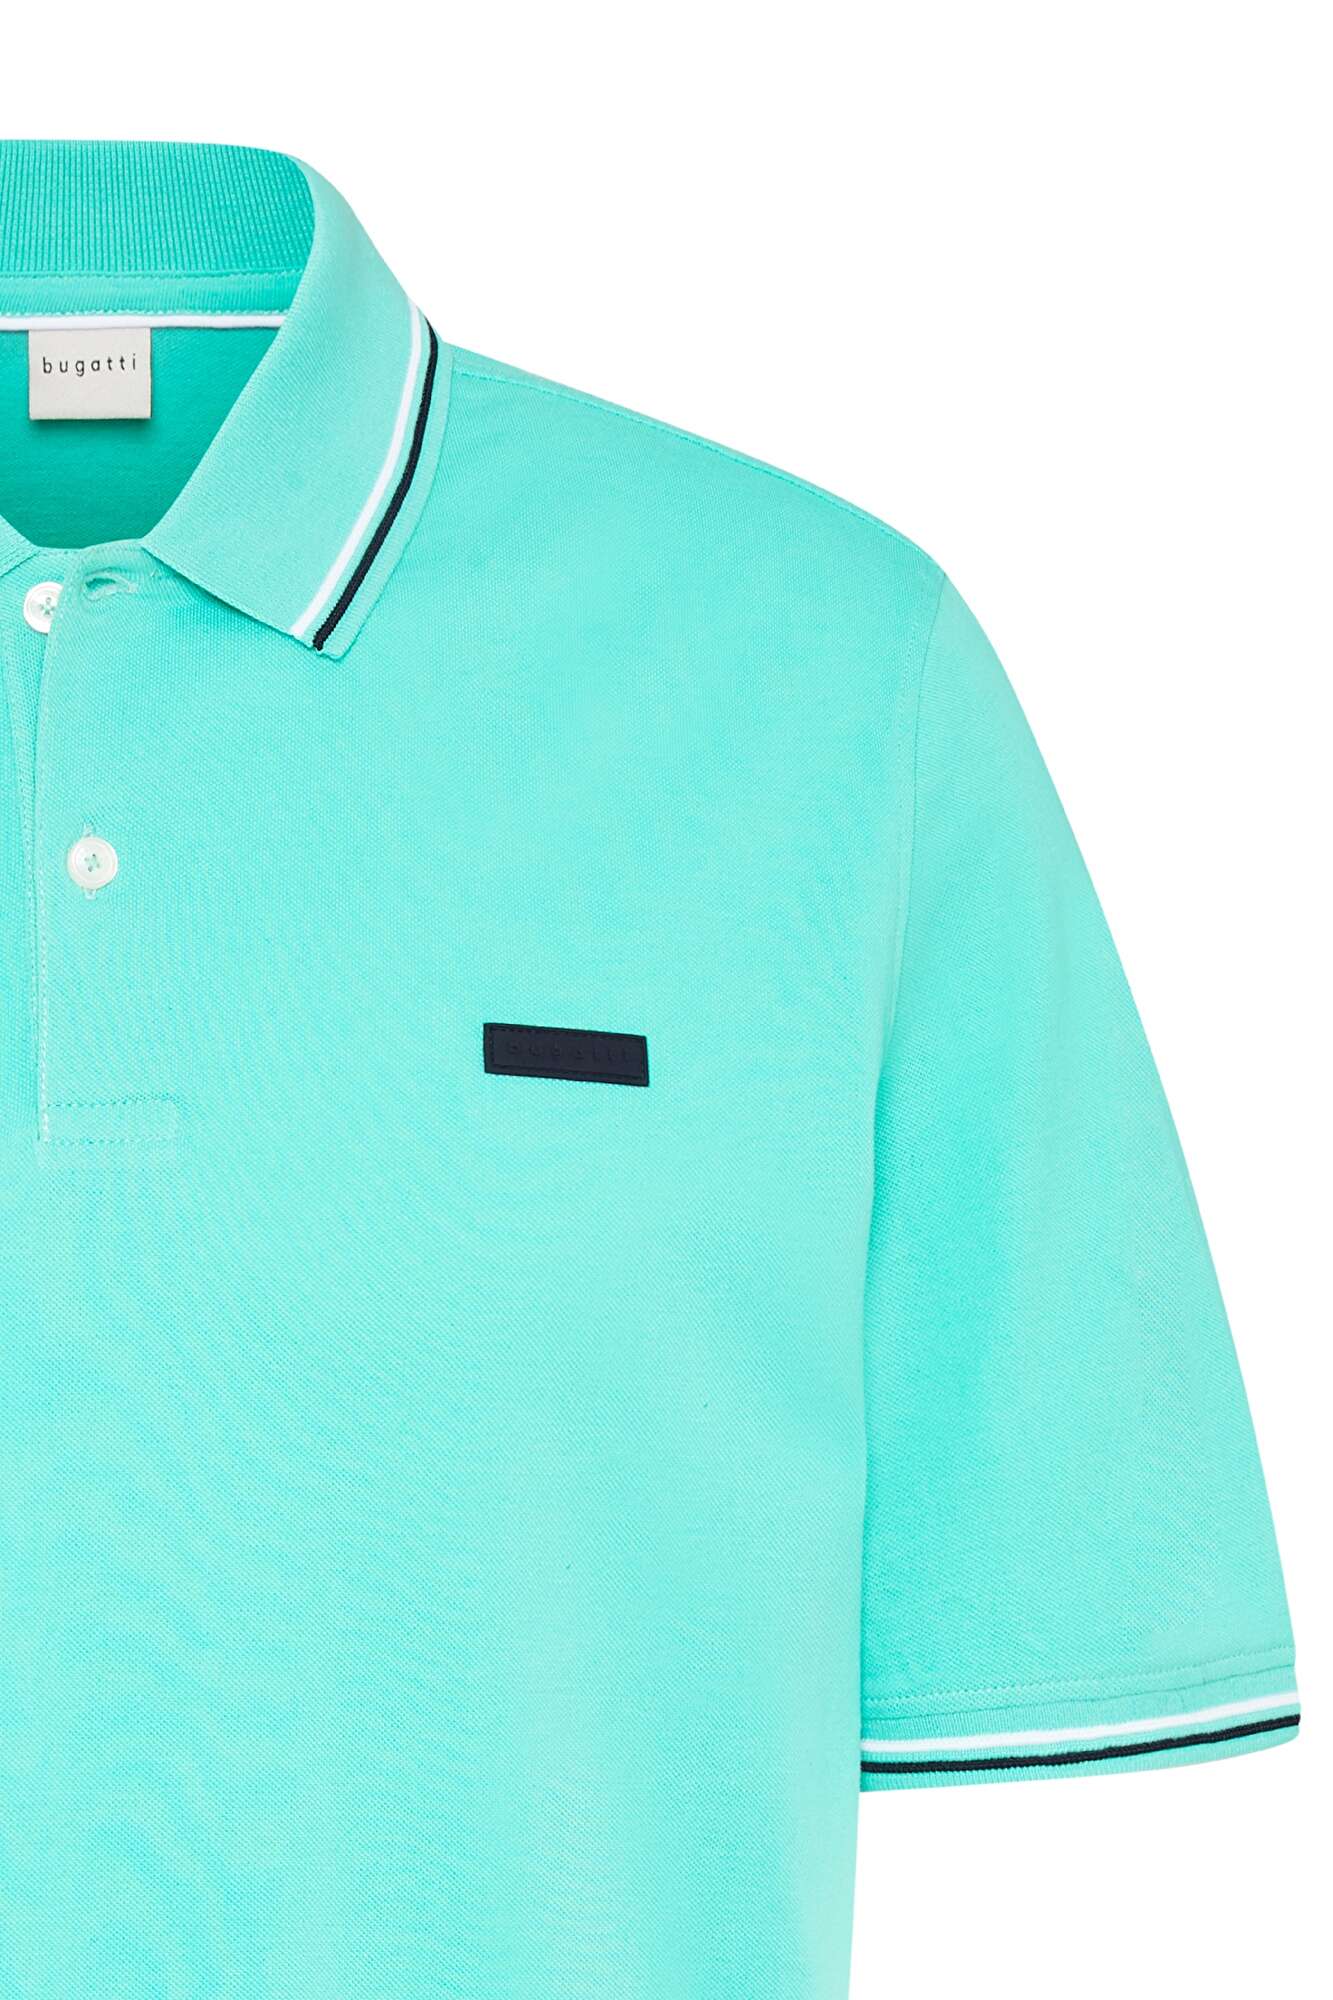 and contrasting shirt | the bugatti cuffs on mint collar stripes with Pique sleeve polo in